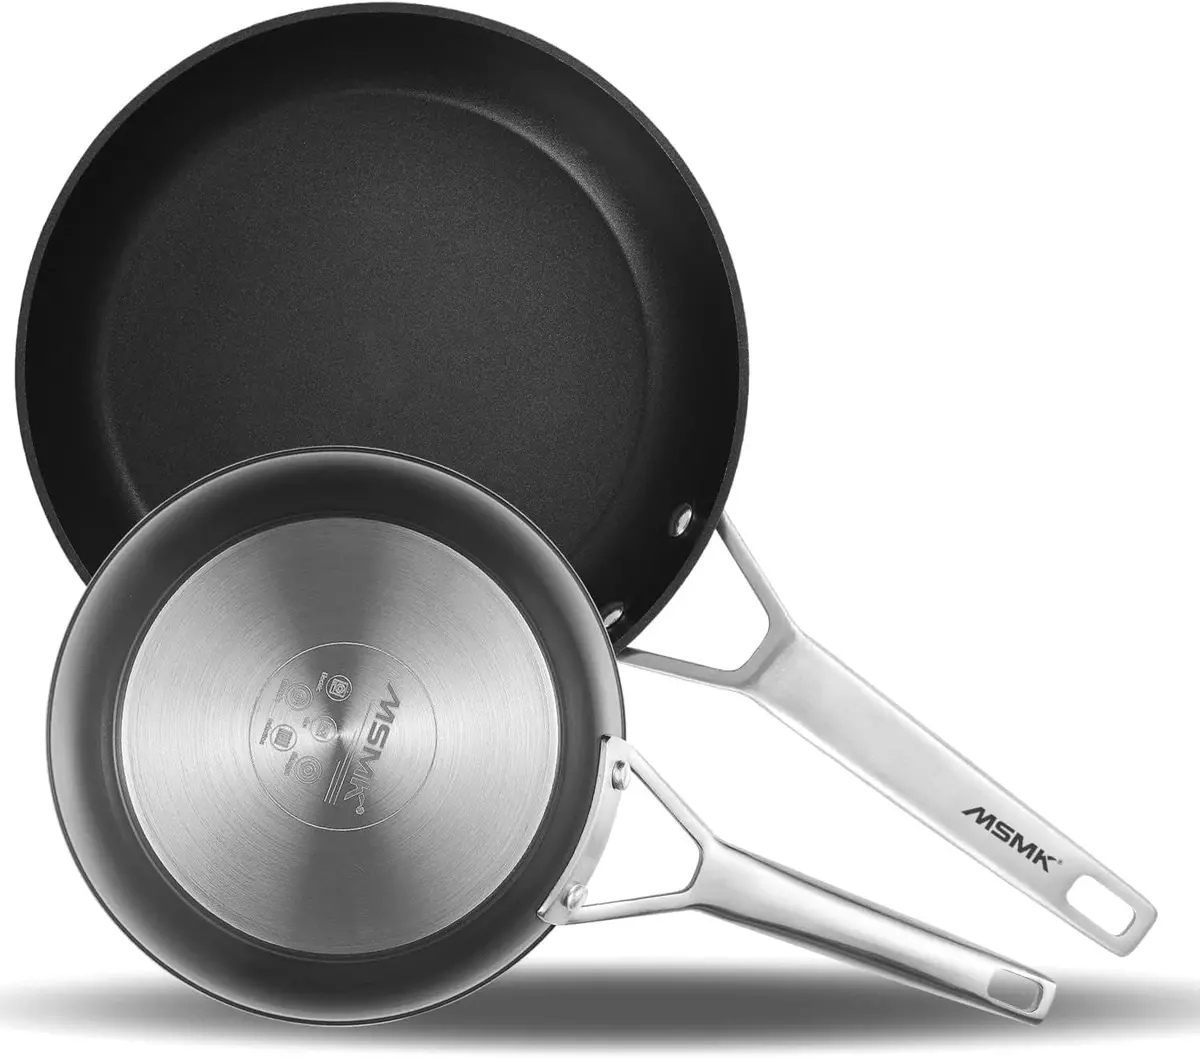 MSMK Frying Pans Nonstick 10, 12 Inch, Carbonize also 10+ 12